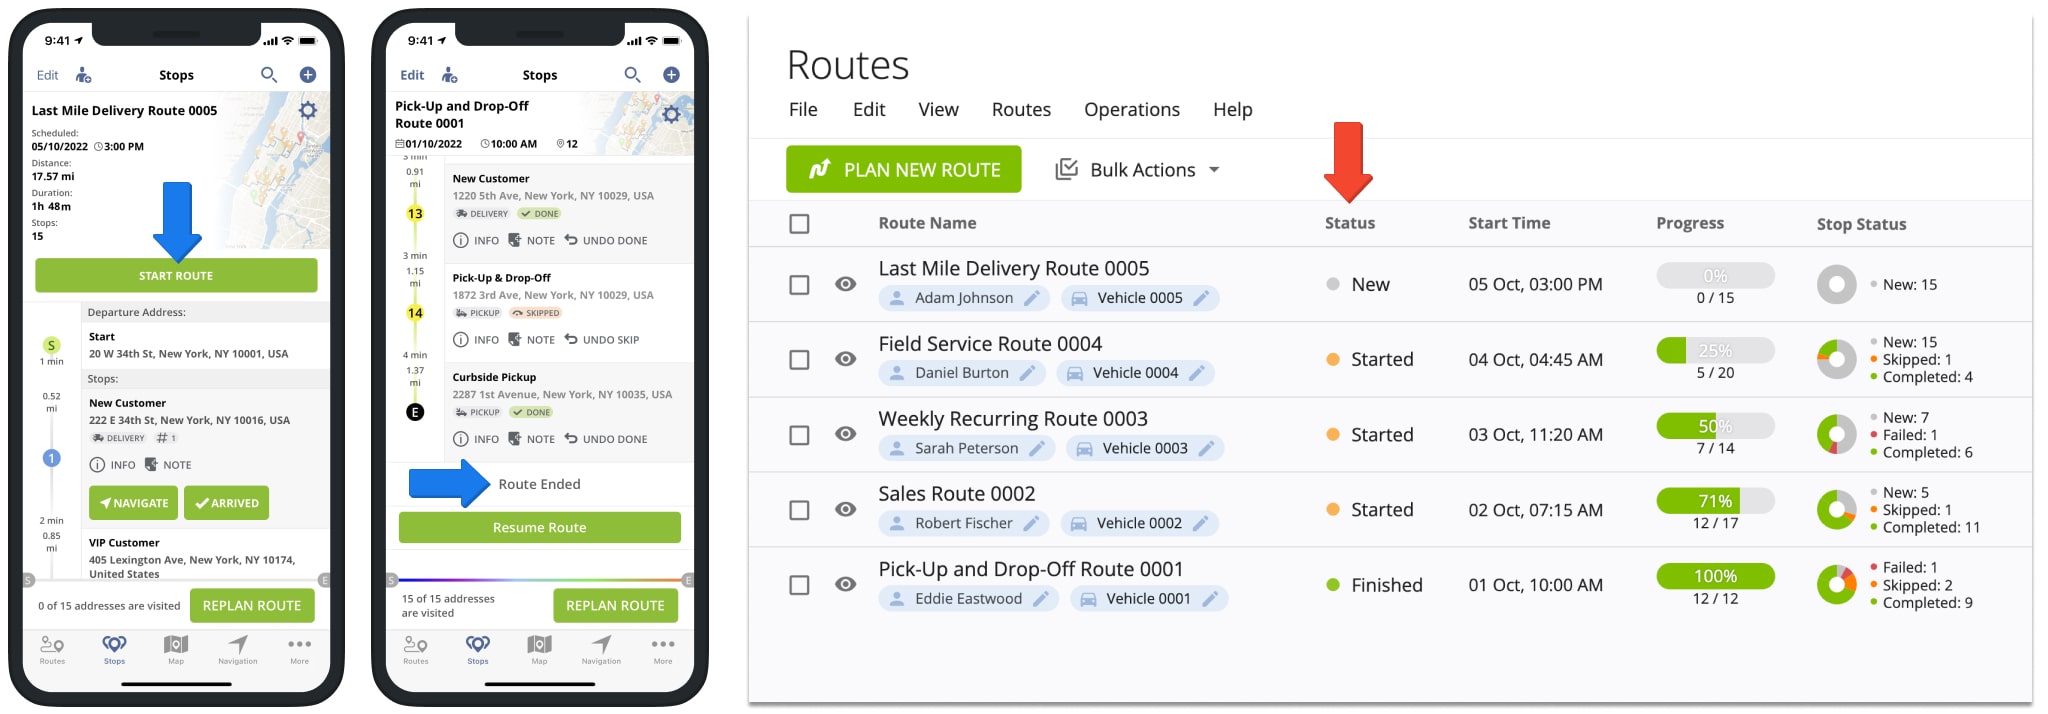 Route Planner Routes List route statuses for new routes, started routes and finished routes.